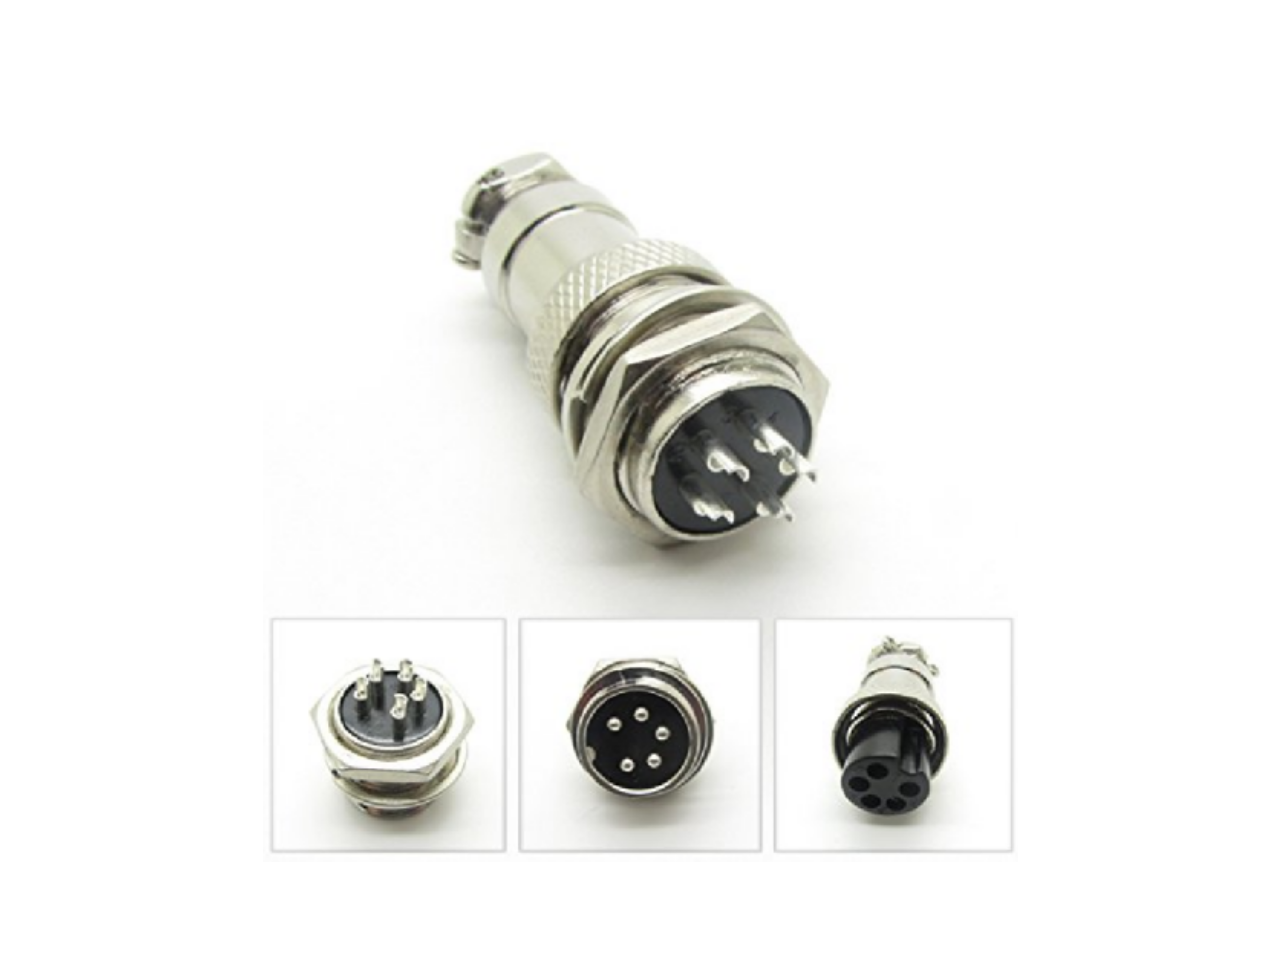 28mm 24P YP28-24 Waterproof Male Wire Panel Power Chassis Metal Fittings Connector Aviation Silver Tone a18032200ux0612 uxcell Aviation Connector 